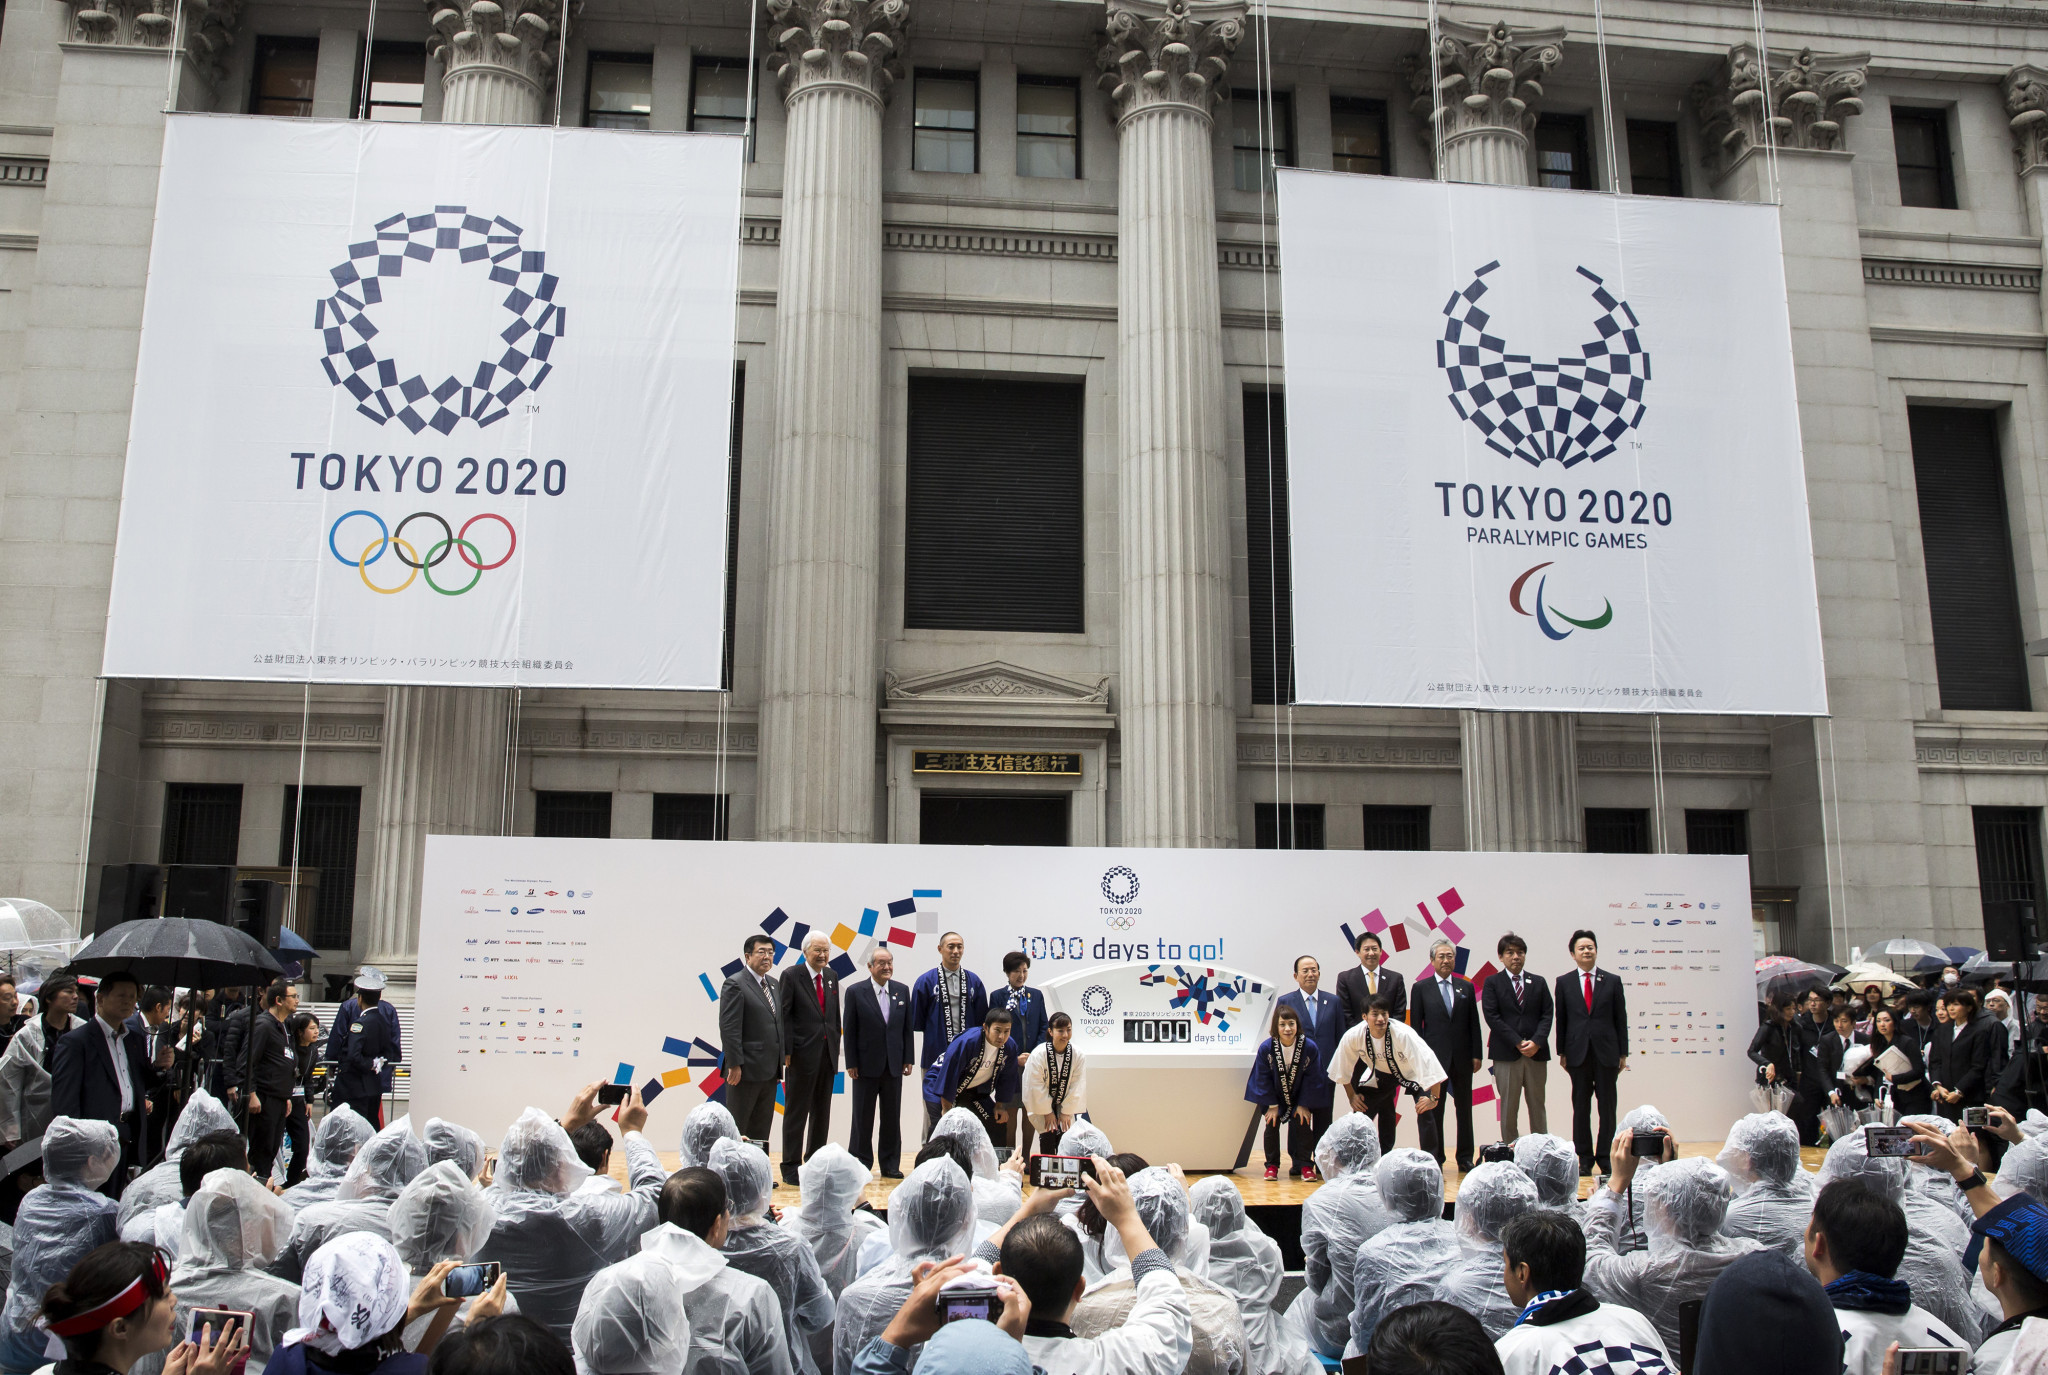 Tokyo 2020 hope to offset carbon emissions for the four Games Ceremonies ©Getty Images